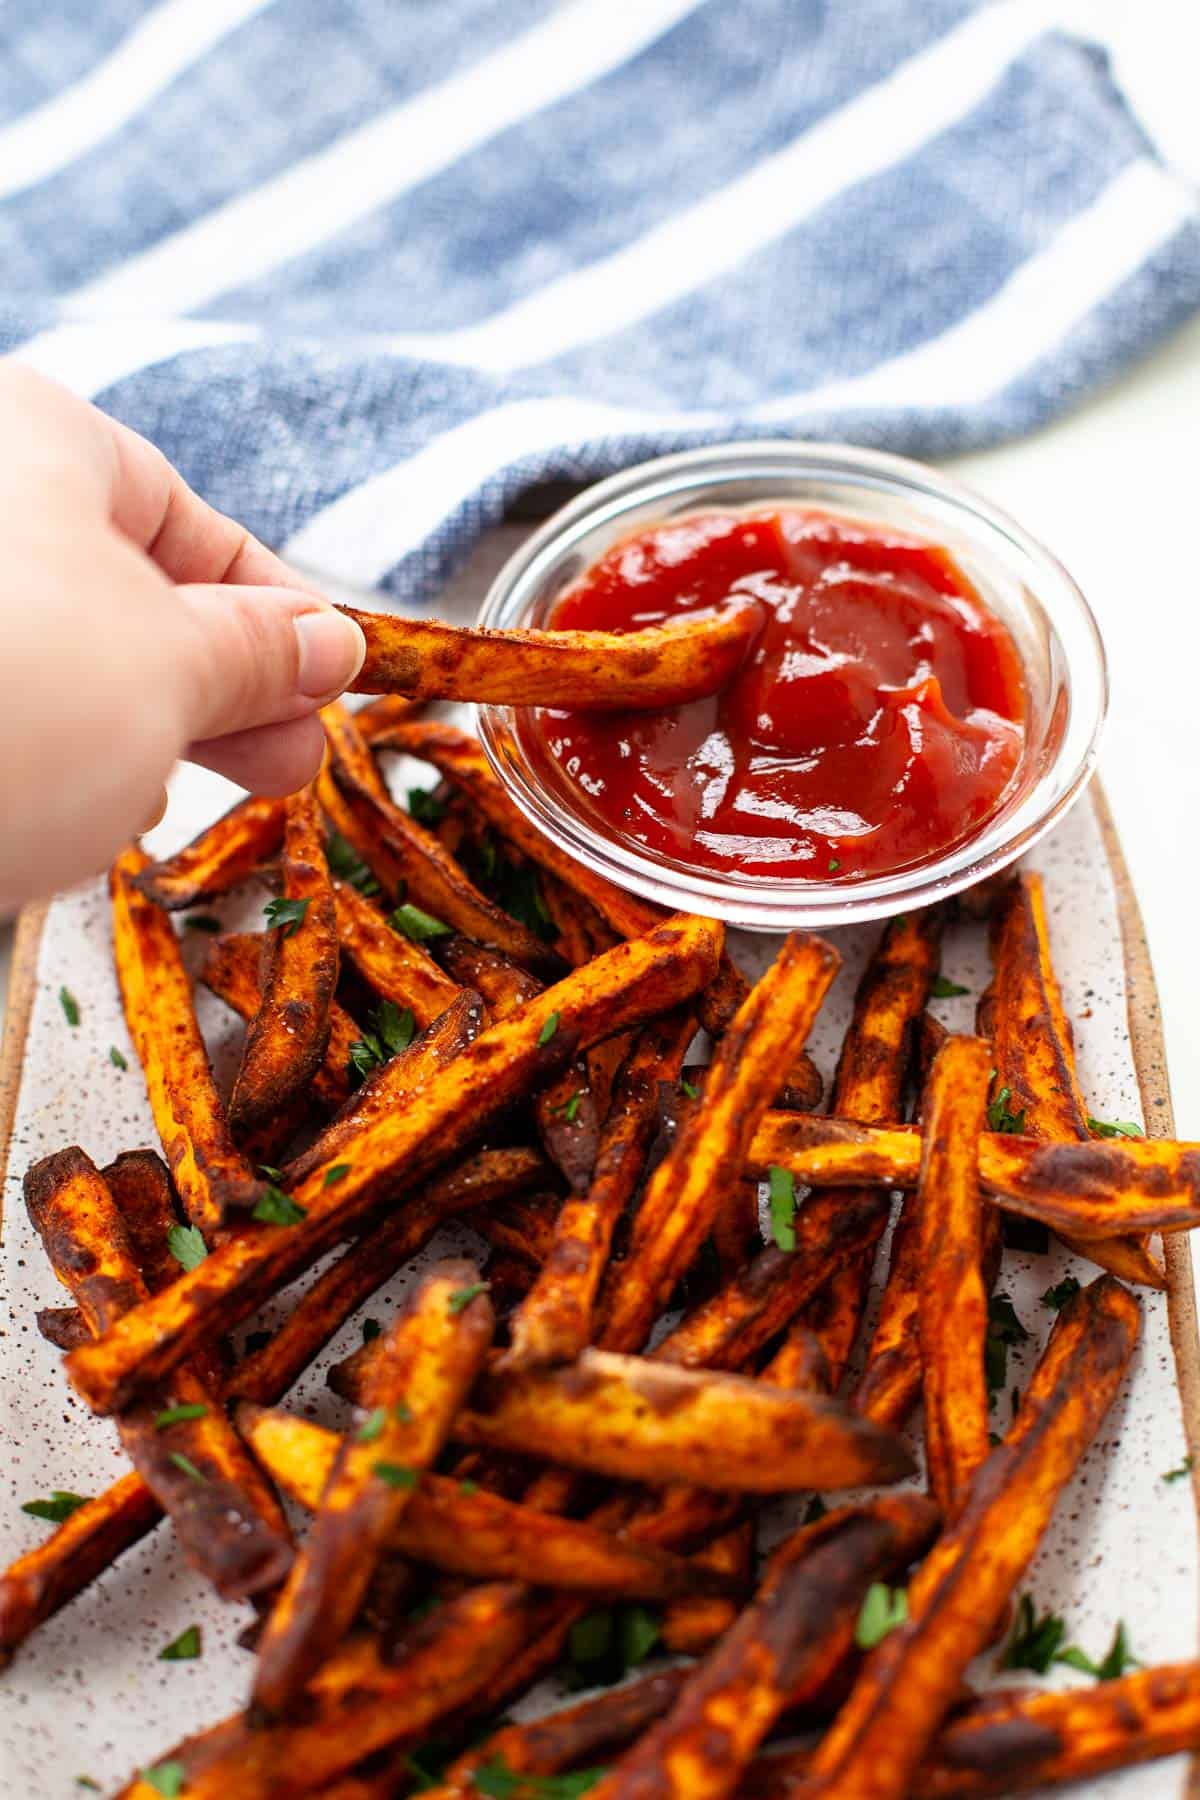 air fryer sweet potato fries dipping fry into side of ketchup blue napkin background